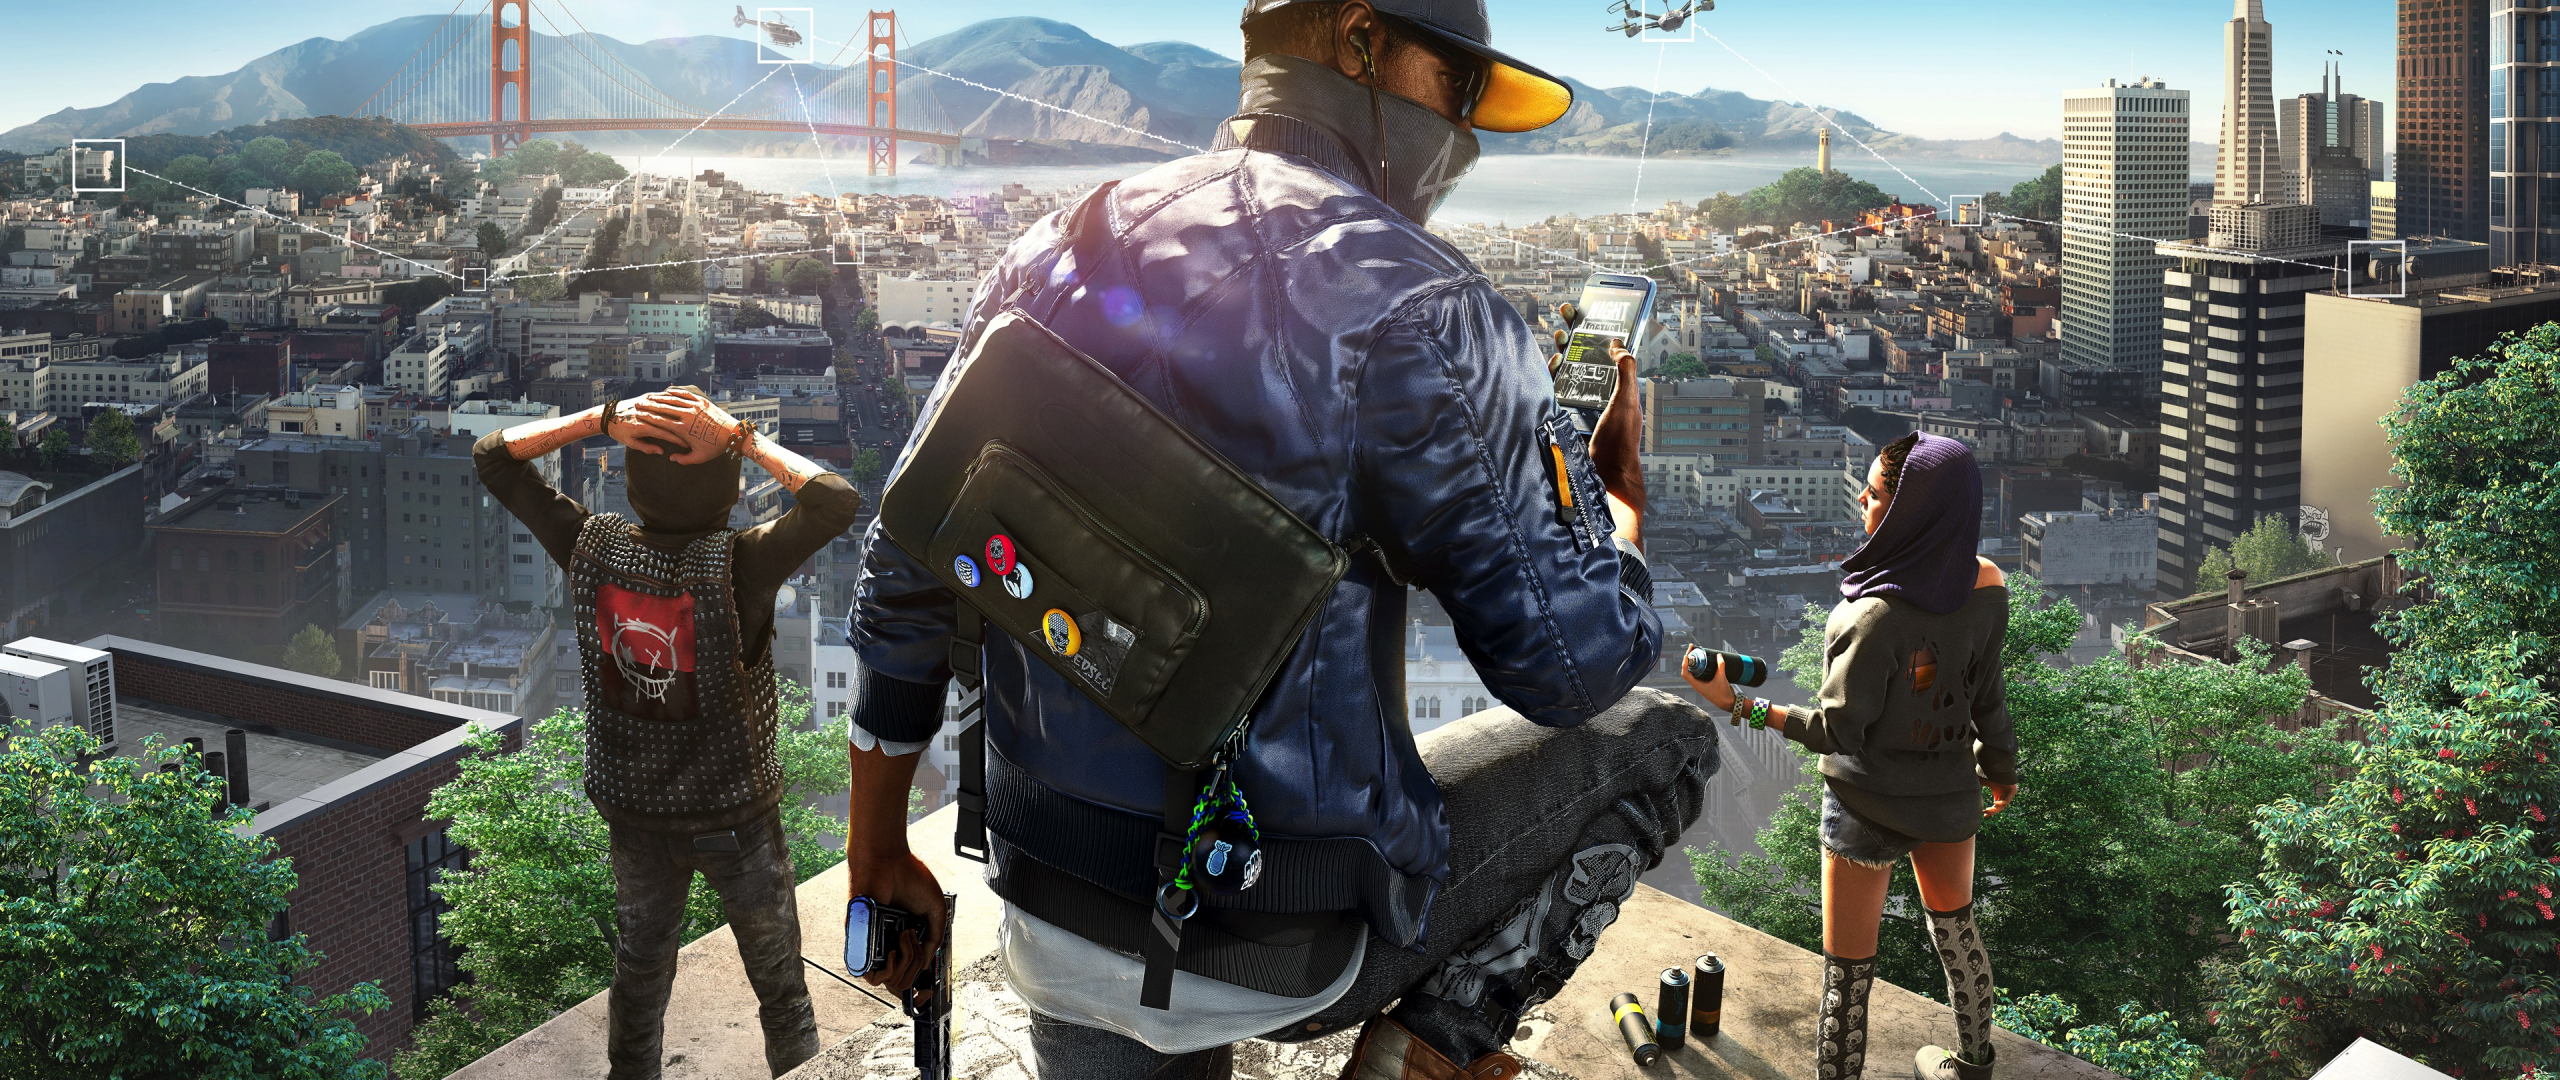 Download 2560x1080 Wallpaper Watch Dogs 2 Video Game